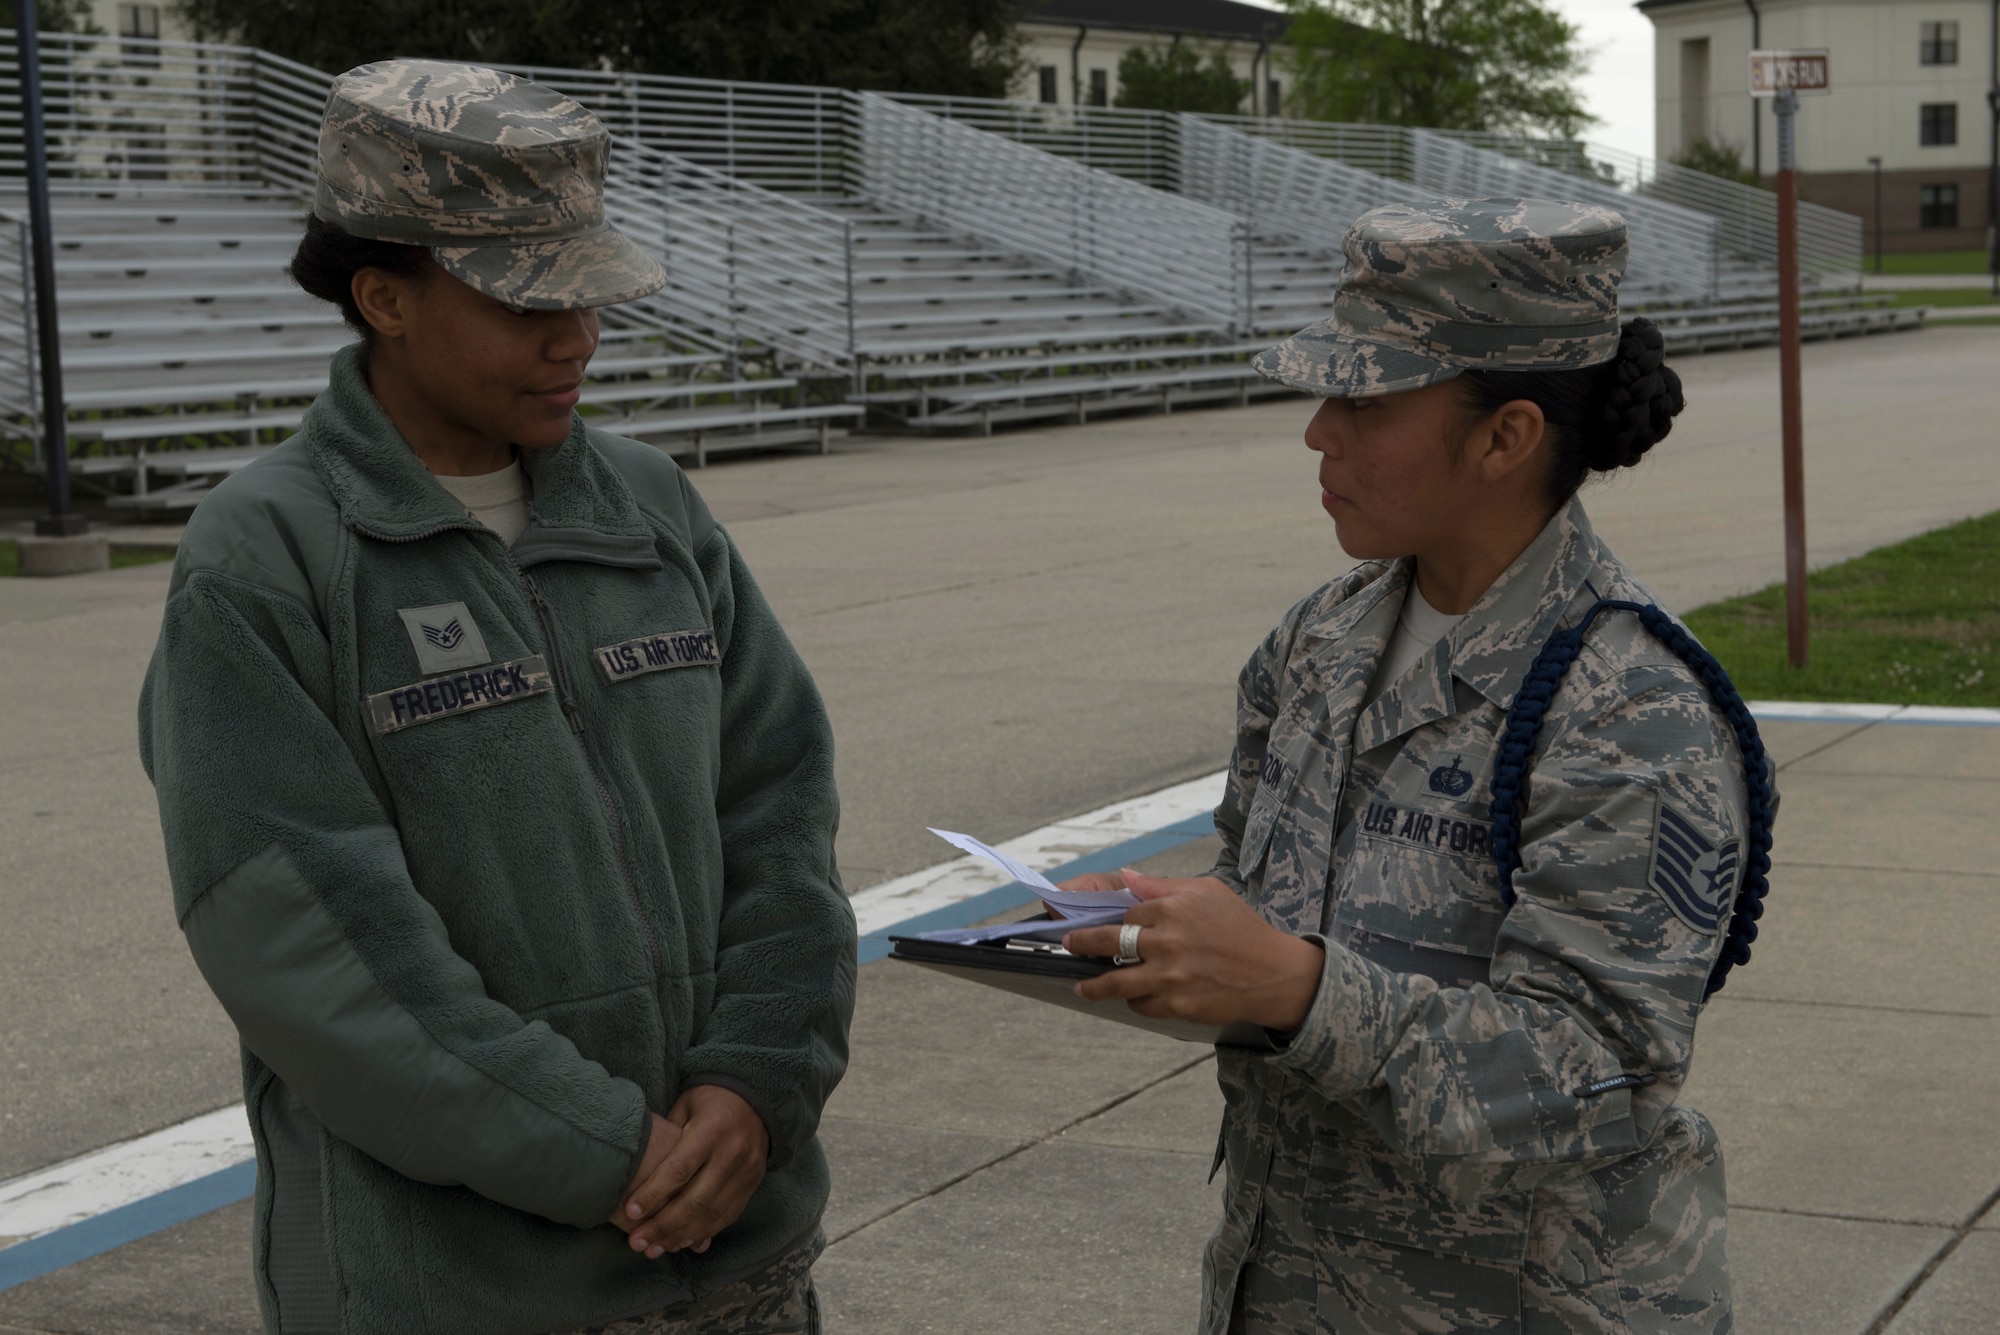 U.S. Air Force Staff Sgt. Ebone Frederick, 81st Training Support Squadron military training leader student, receives advice in performing an open-ranks inspection from Tech. Sgt. Victoria Monzon, 81st TRSS MTL instructor, at Keesler Air Force Base, Mississippi, March 15, 2019. The evaluation allowed Monzon to assist her student in performing a higher quality open-ranks inspection and strengthen the student’s skill-set as a future MTL. (U.S. Air Force photo by Airman 1st Class Kimberly Mueller)